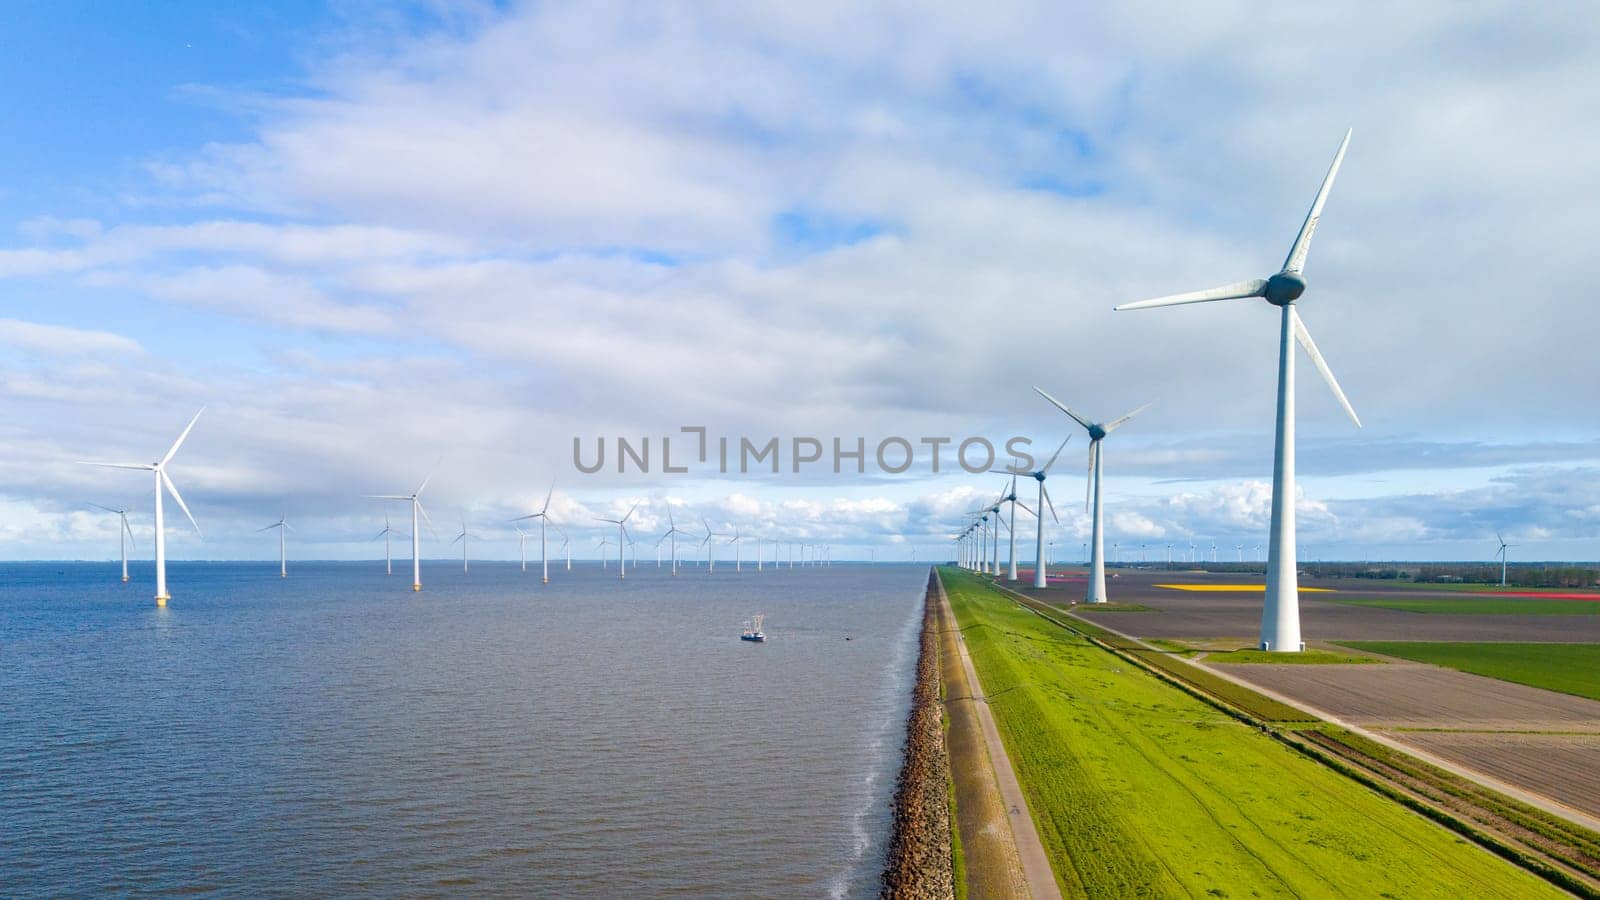 A row of majestic wind turbines stand elegantly next to a calm body of water under the clear Spring sky in the Netherlands by fokkebok